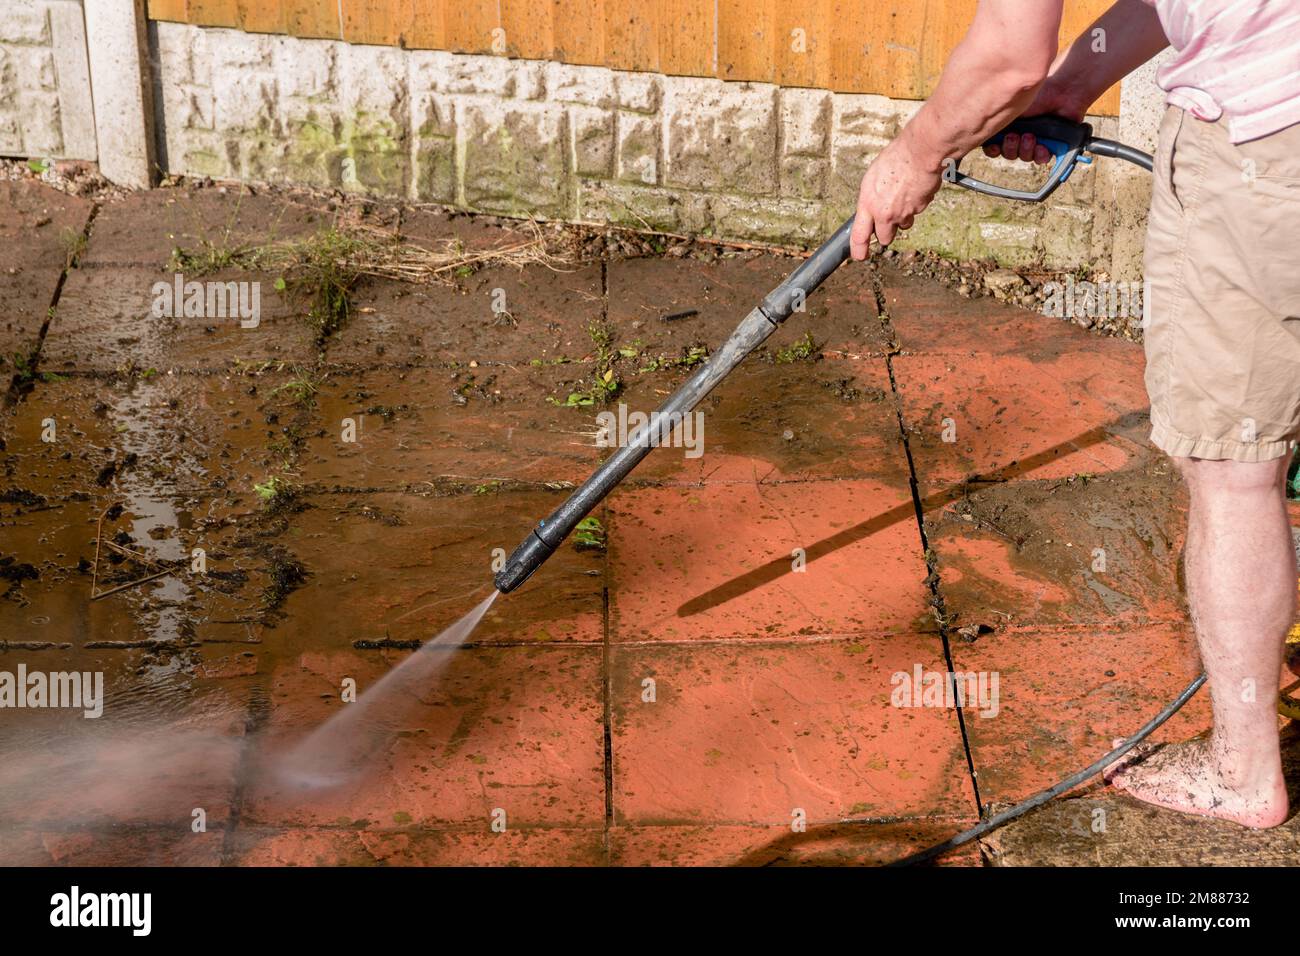 A man using a power pressure washer to clean a dirty stained patio with pressurised water jet Stock Photo